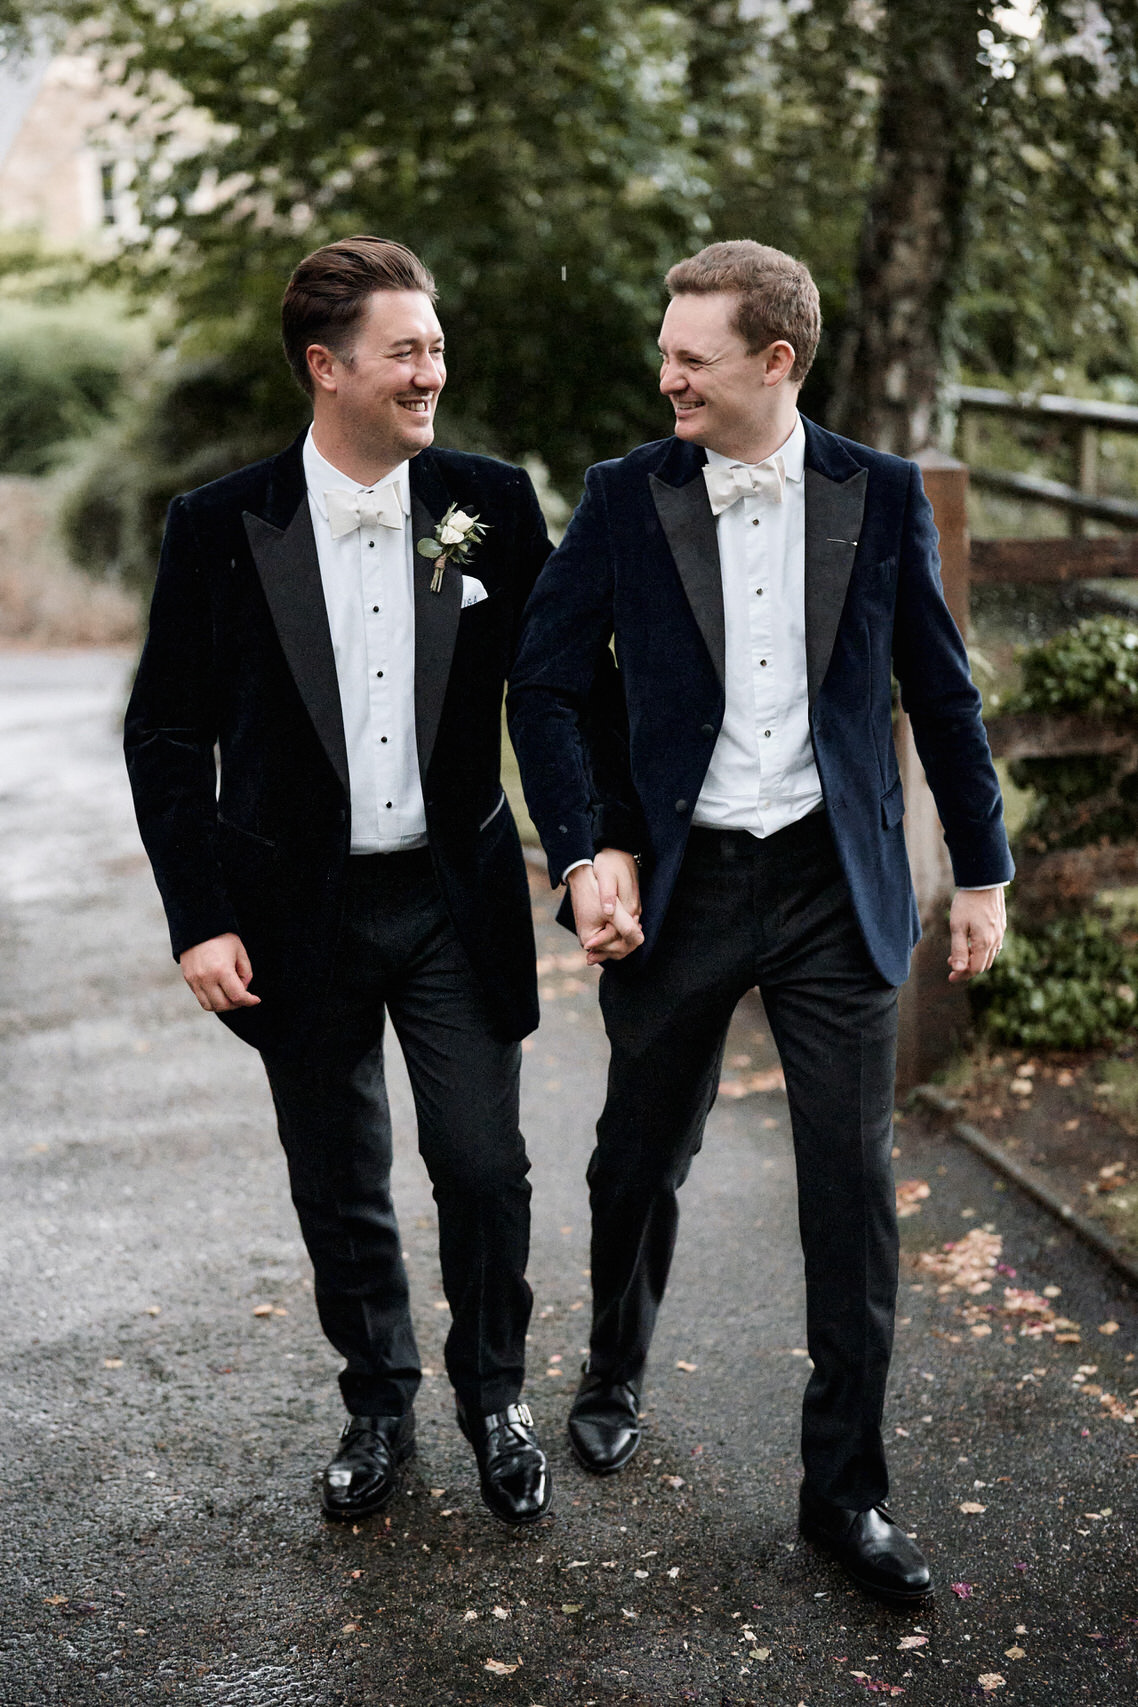 Two guys in suits are strolling down a path.